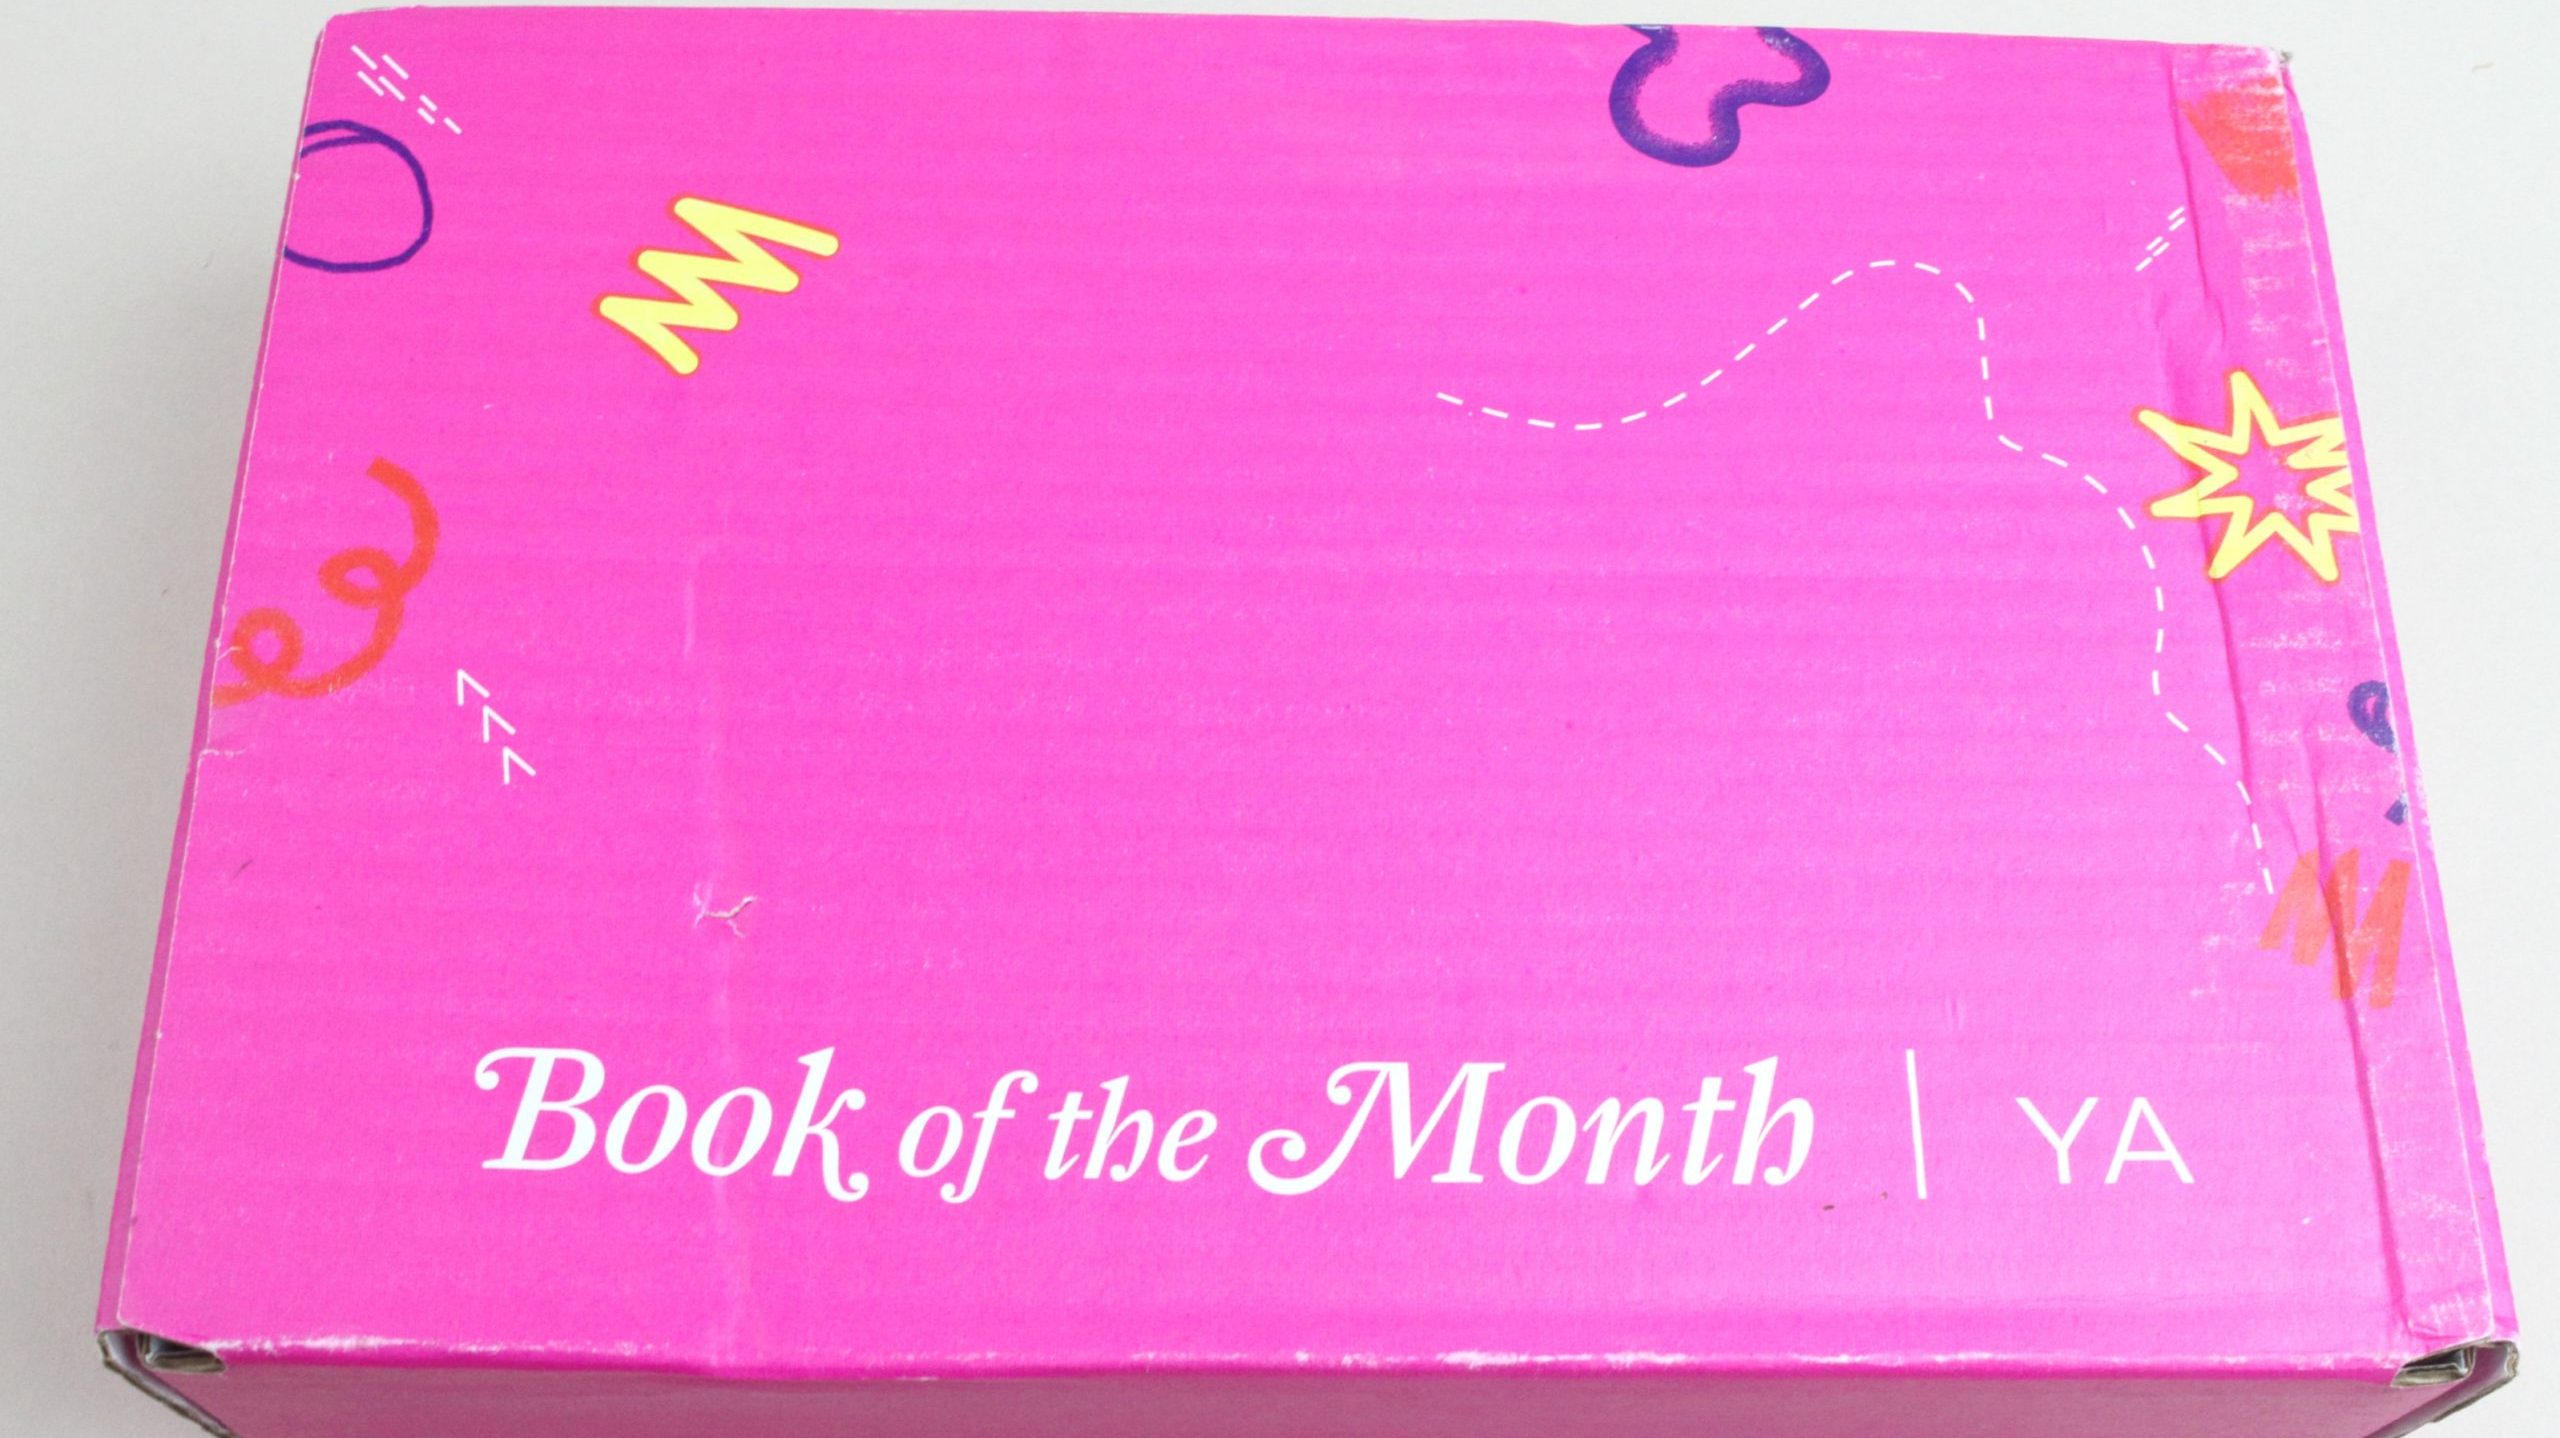 Book of the month.